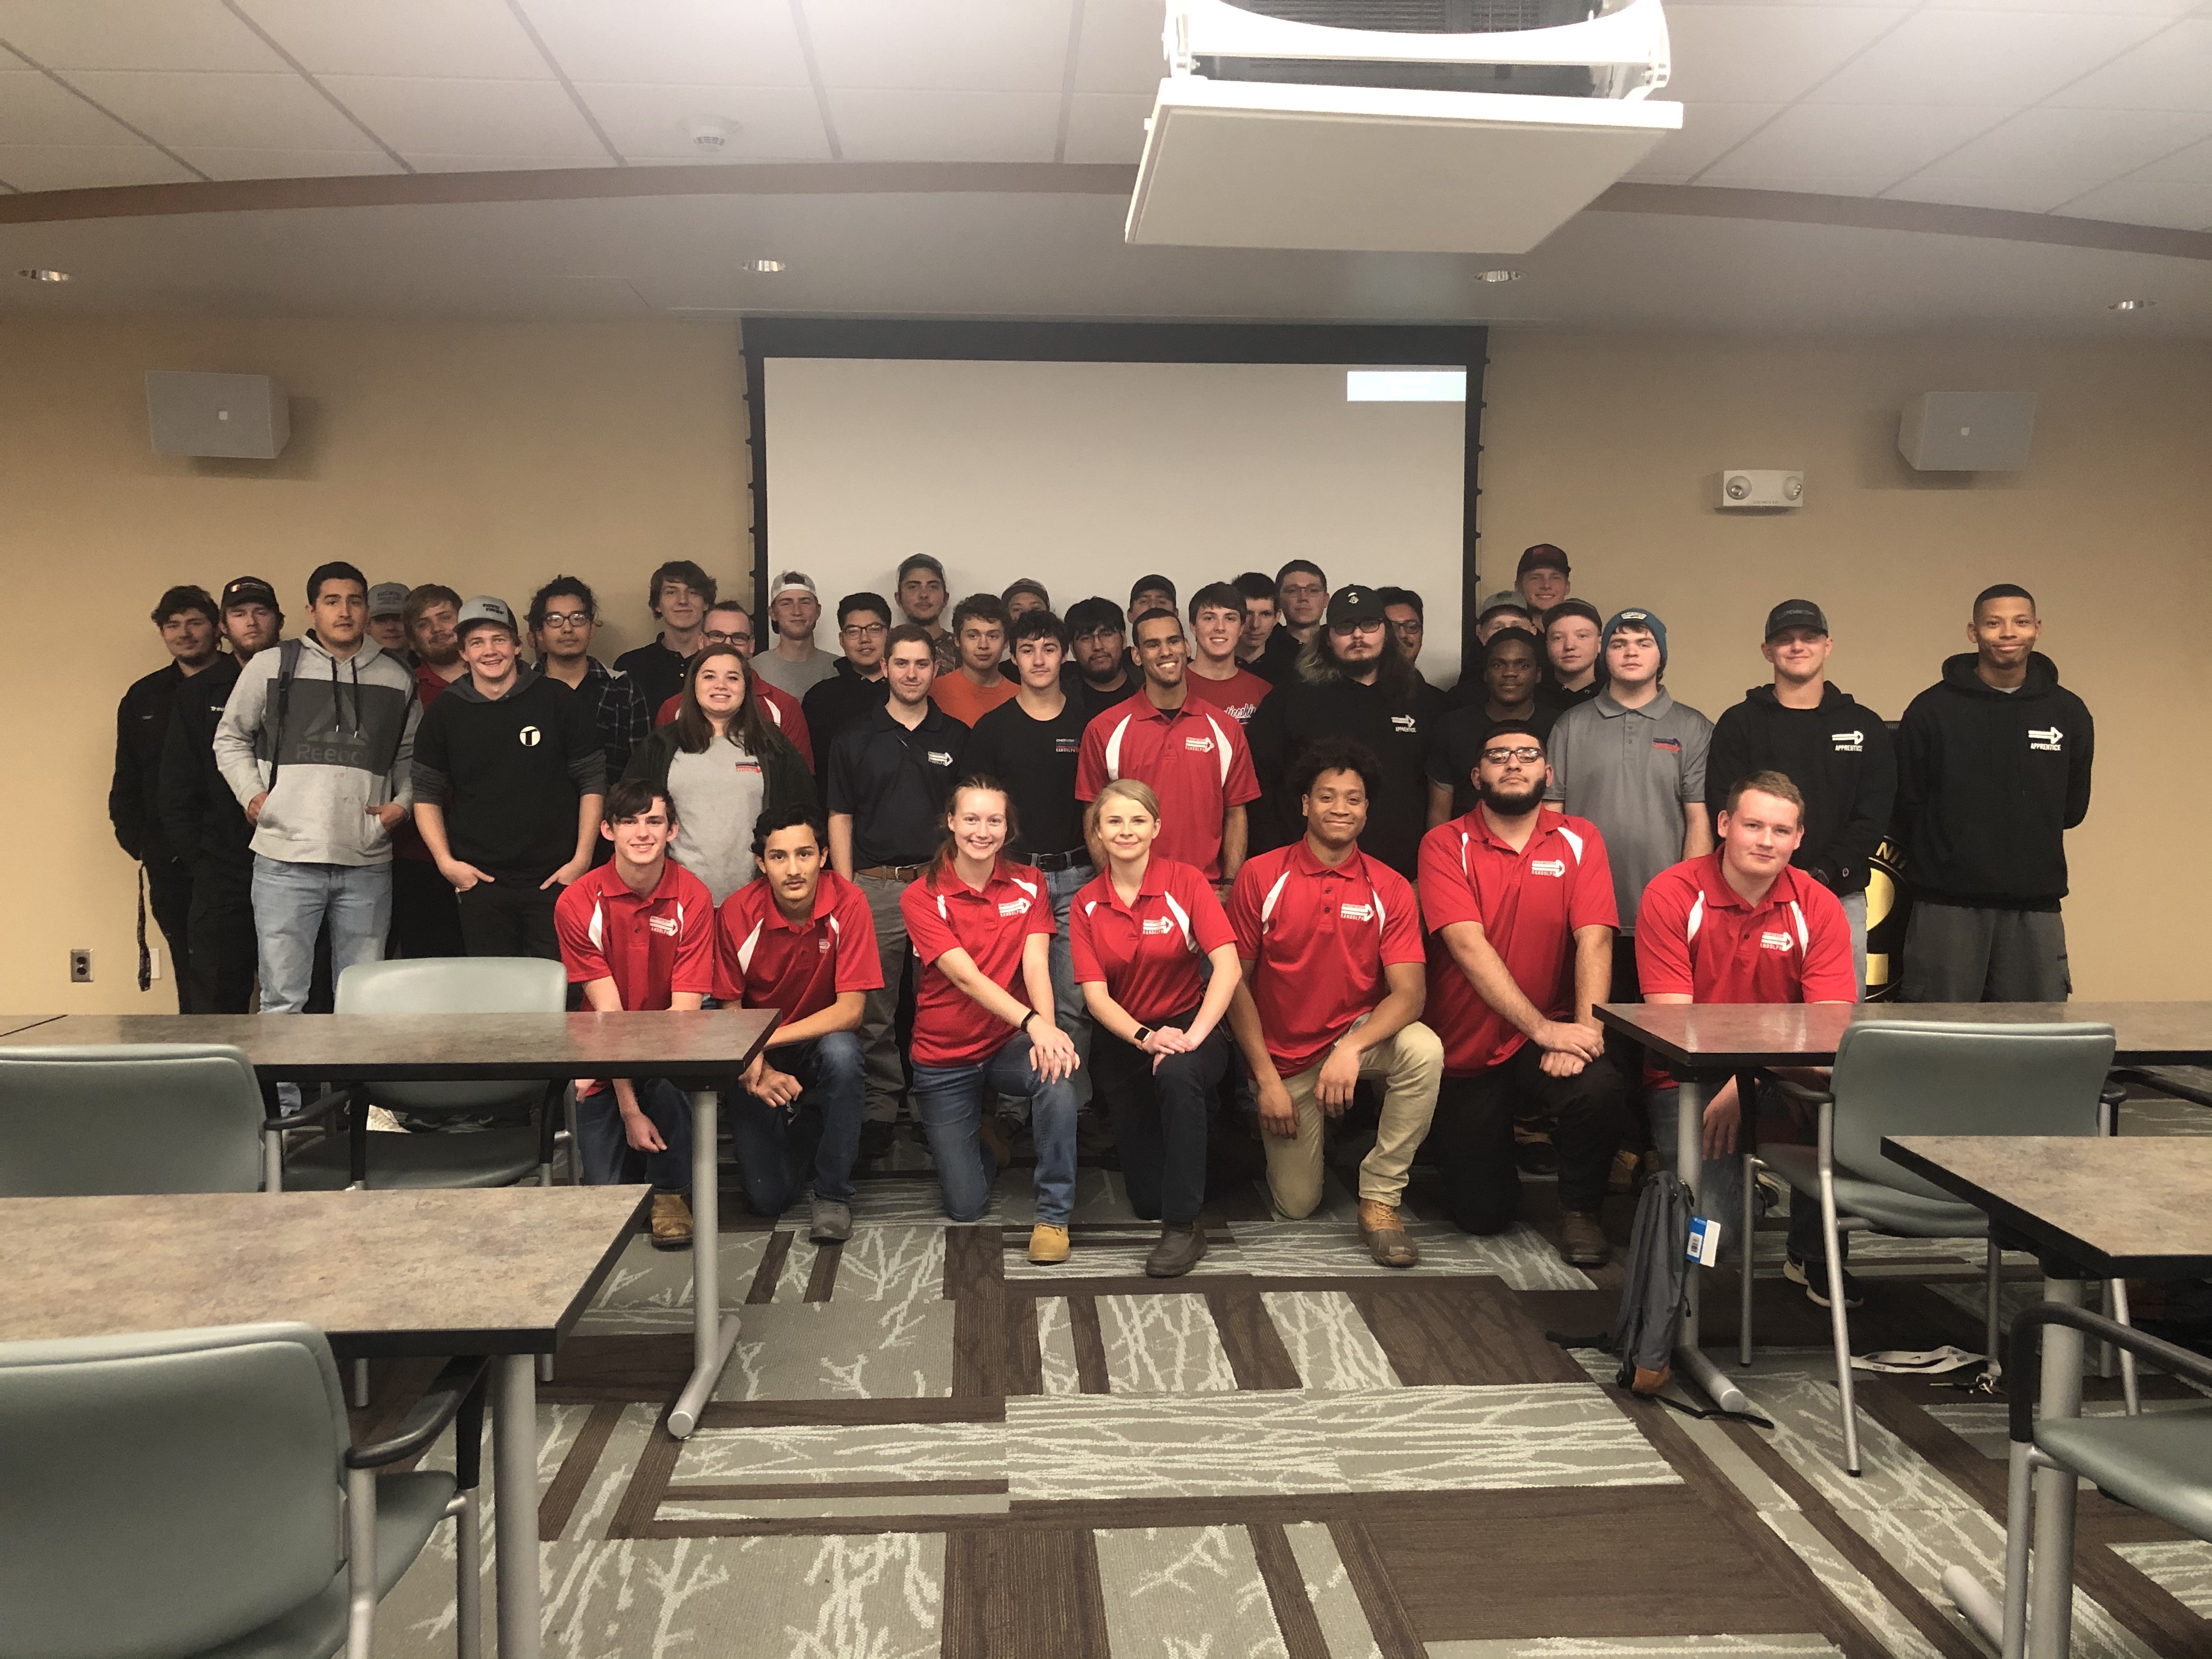 The current Apprenticeship Randolph apprentices gathered Wednesday, Nov. 13, in the JB & Claire Davis Corporate Training Center on the Randolph Community College campus to celebrate National Apprenticeship Week.